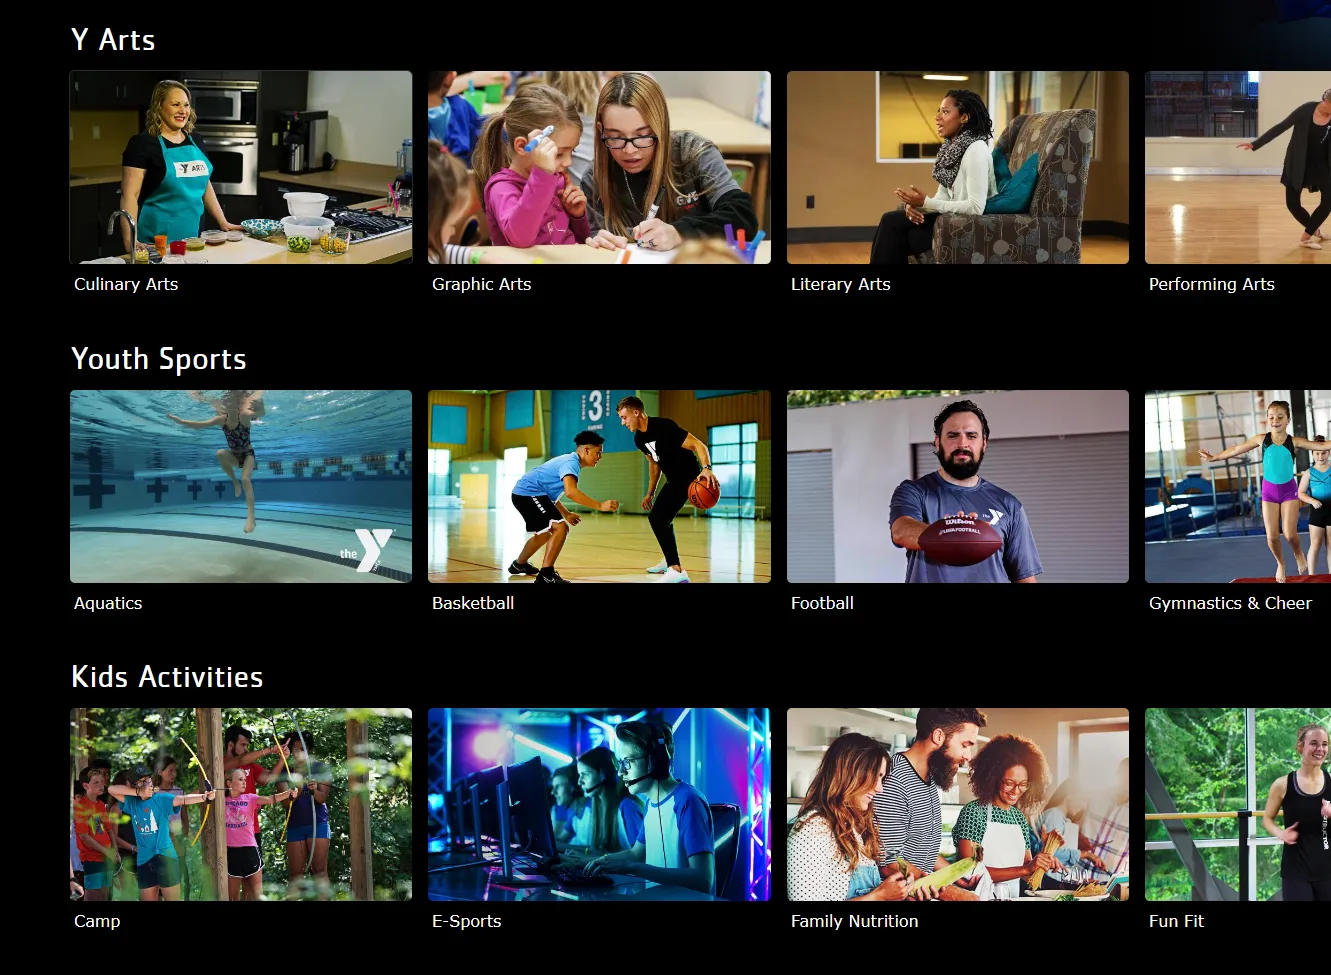 Screenshot of YMCA360 video categories including Y Arts, Youth Sports, and Kids Activities.